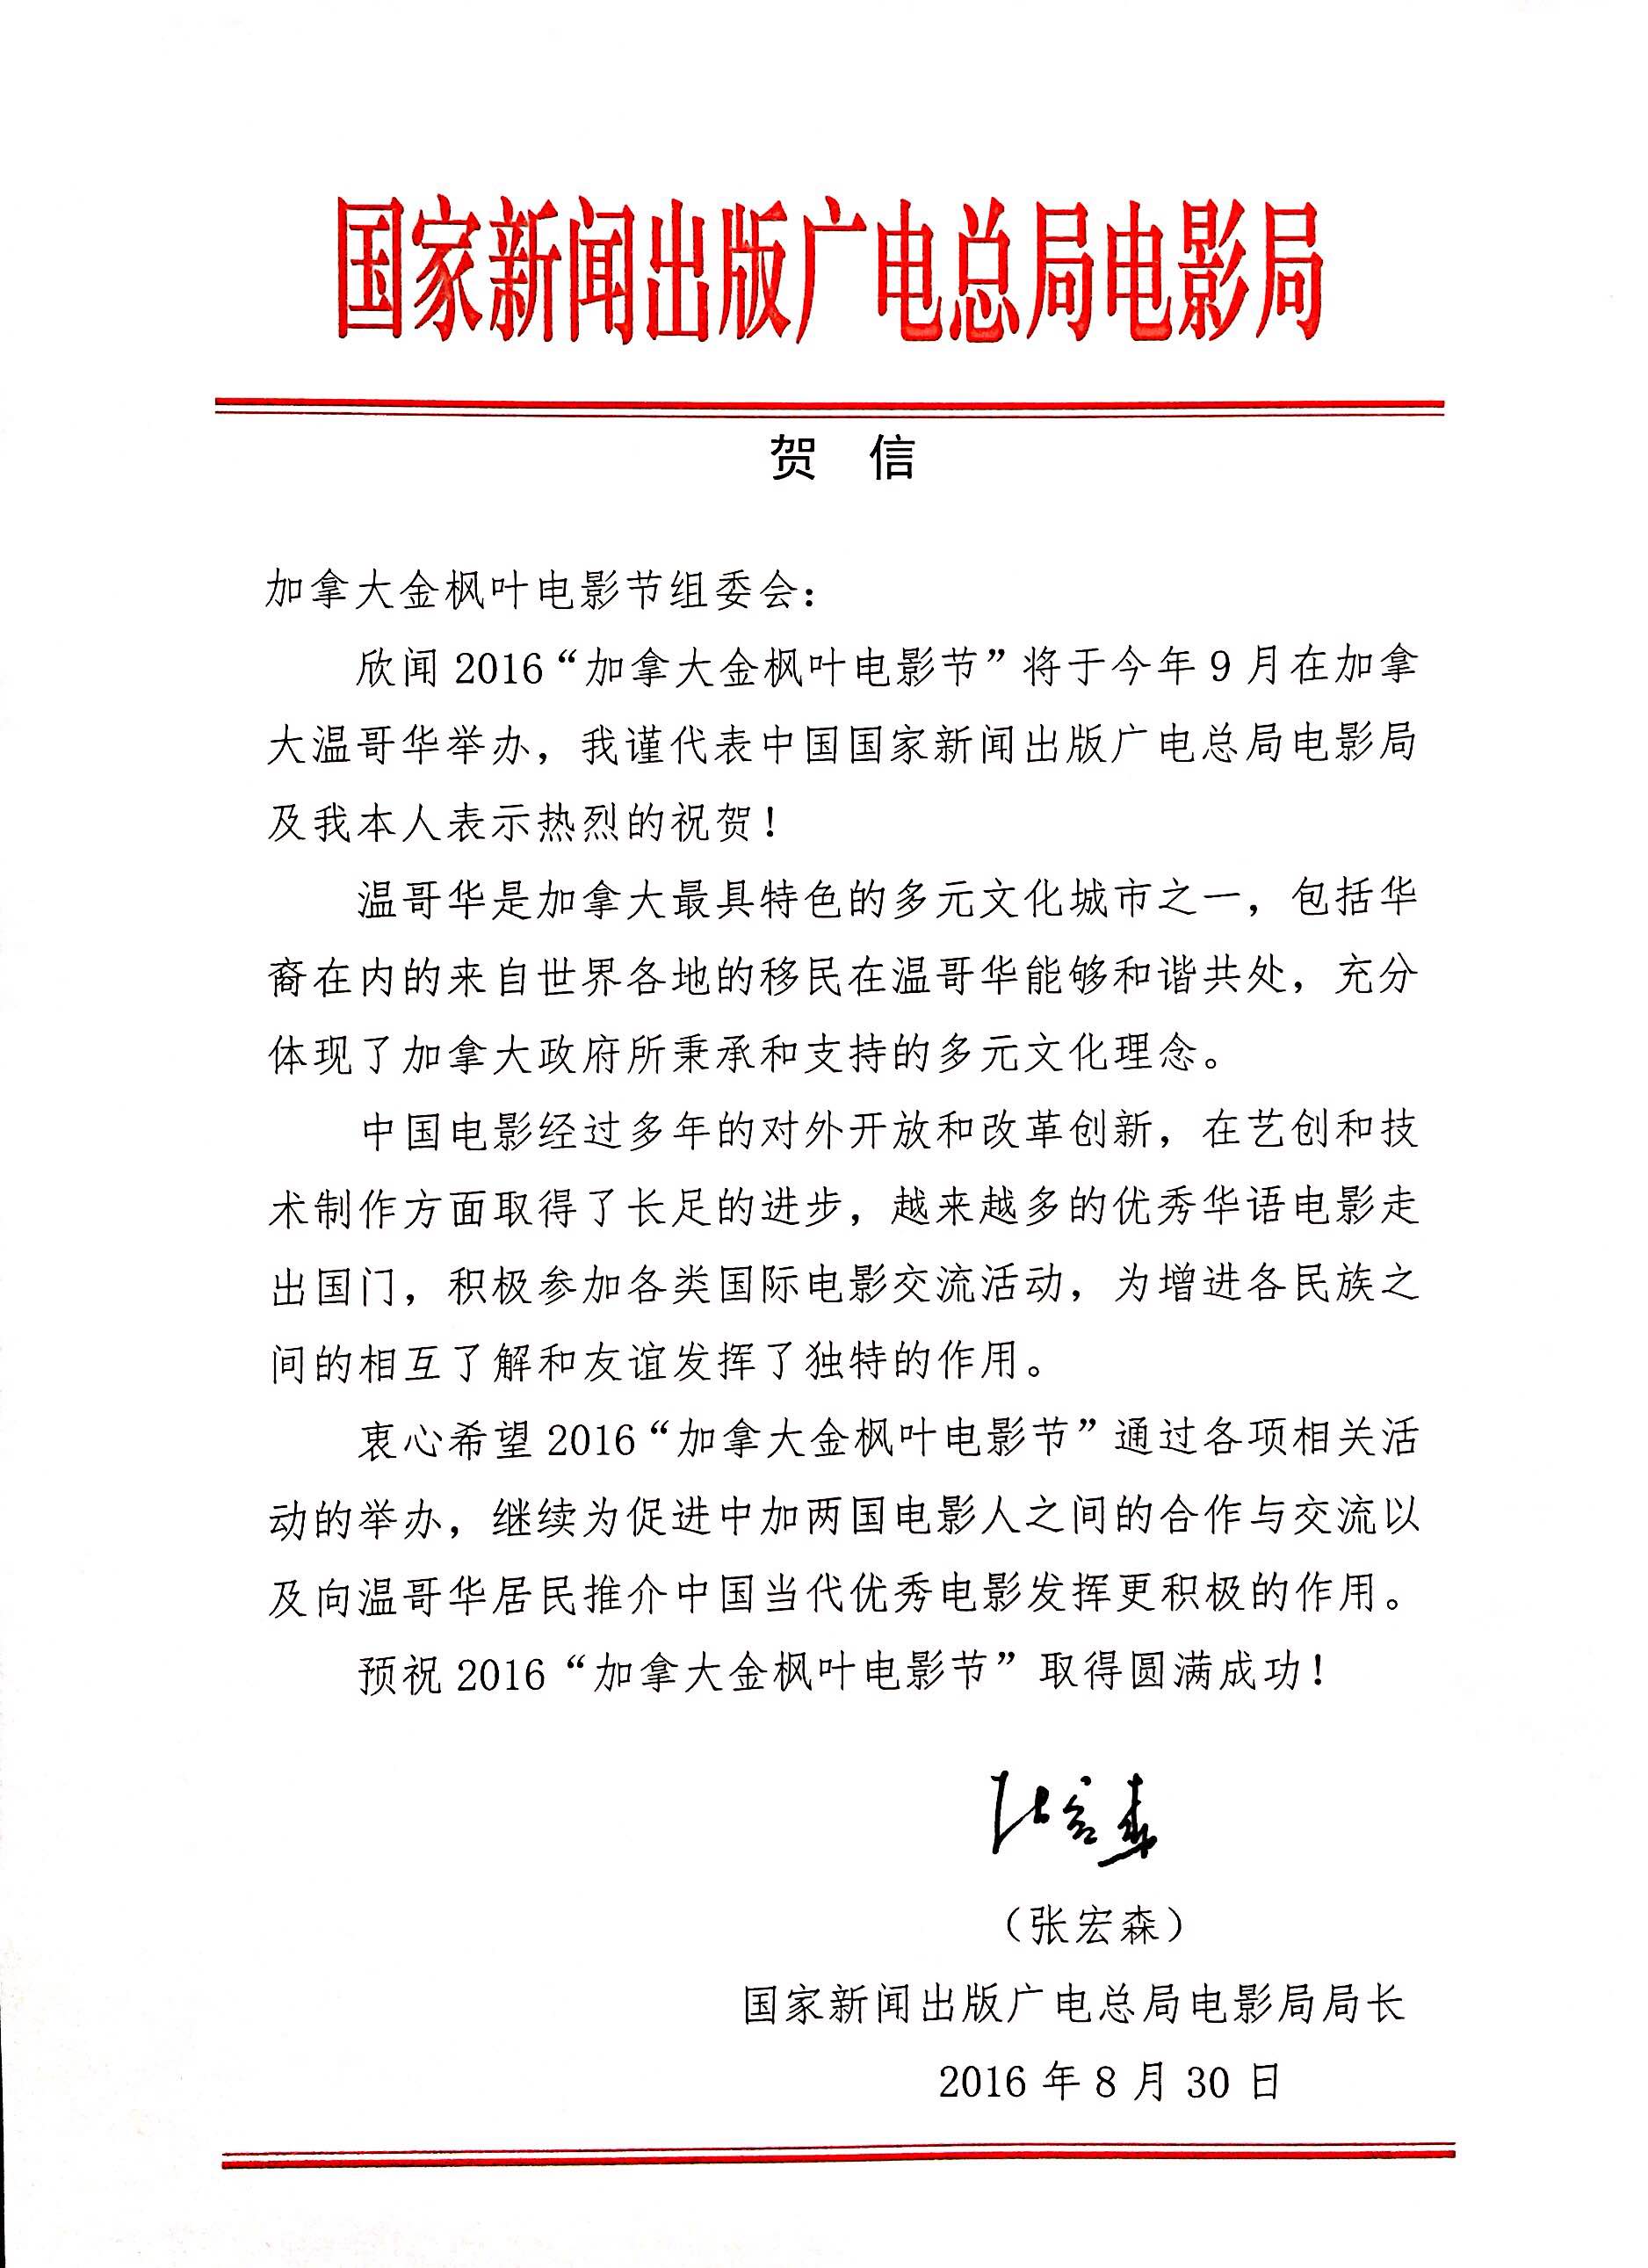 Congratulatory Letter from State Administration of Press, Publication, Radio, Film and Television of The People's Republic of China